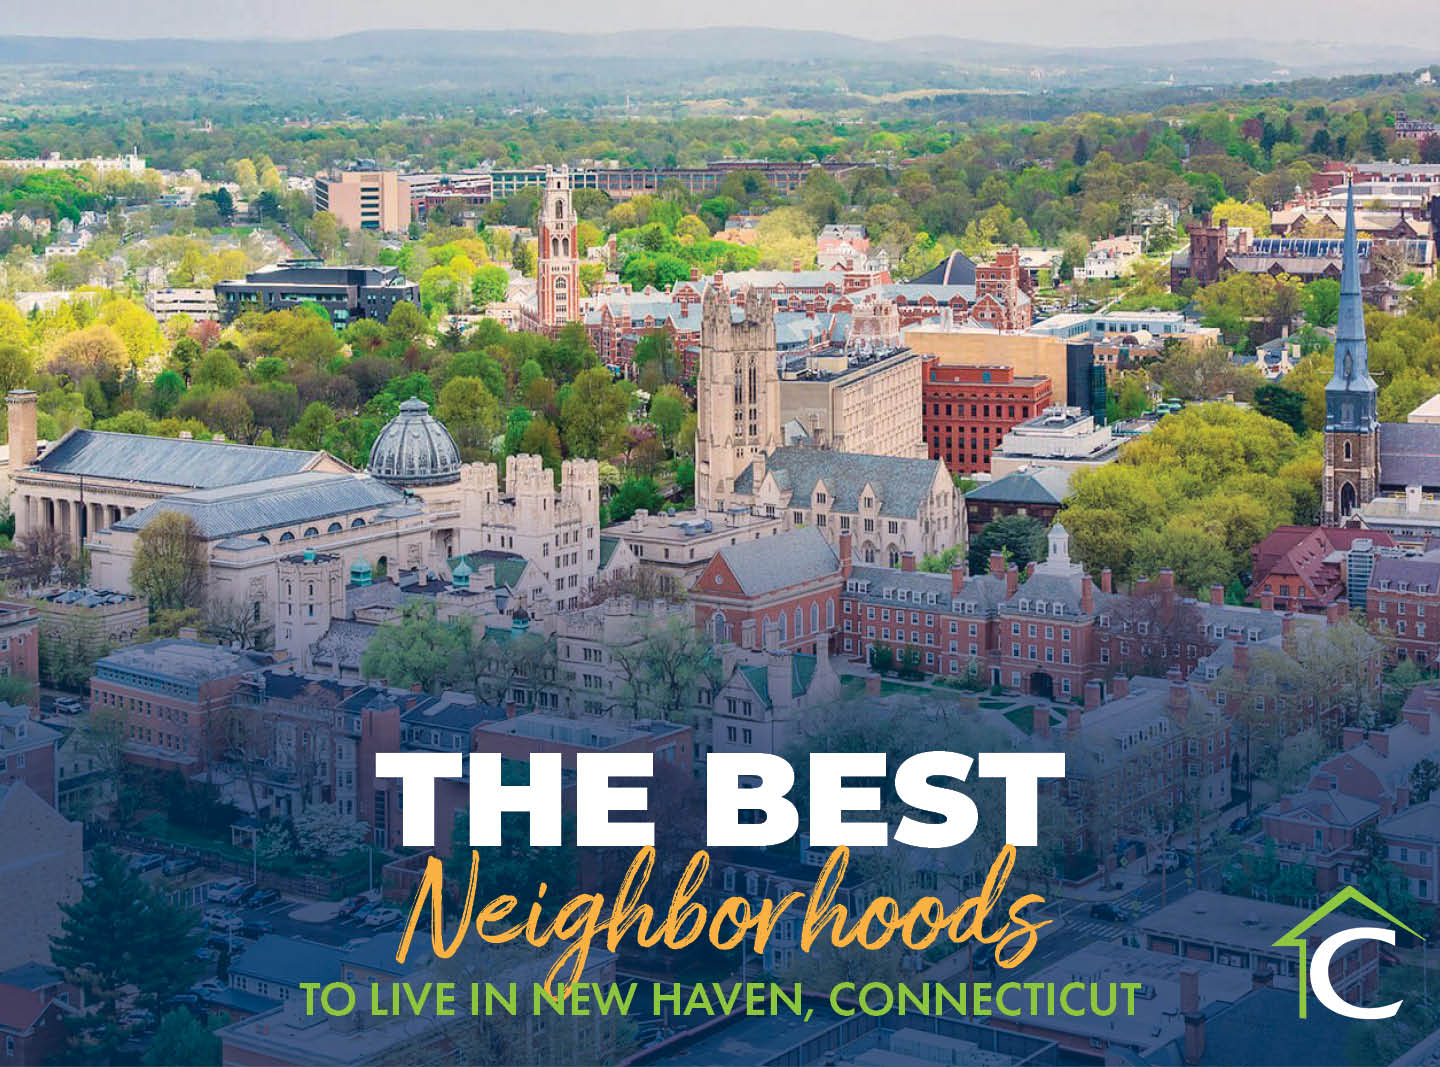 The Best Neighborhoods To Live In New Haven, Connecticut